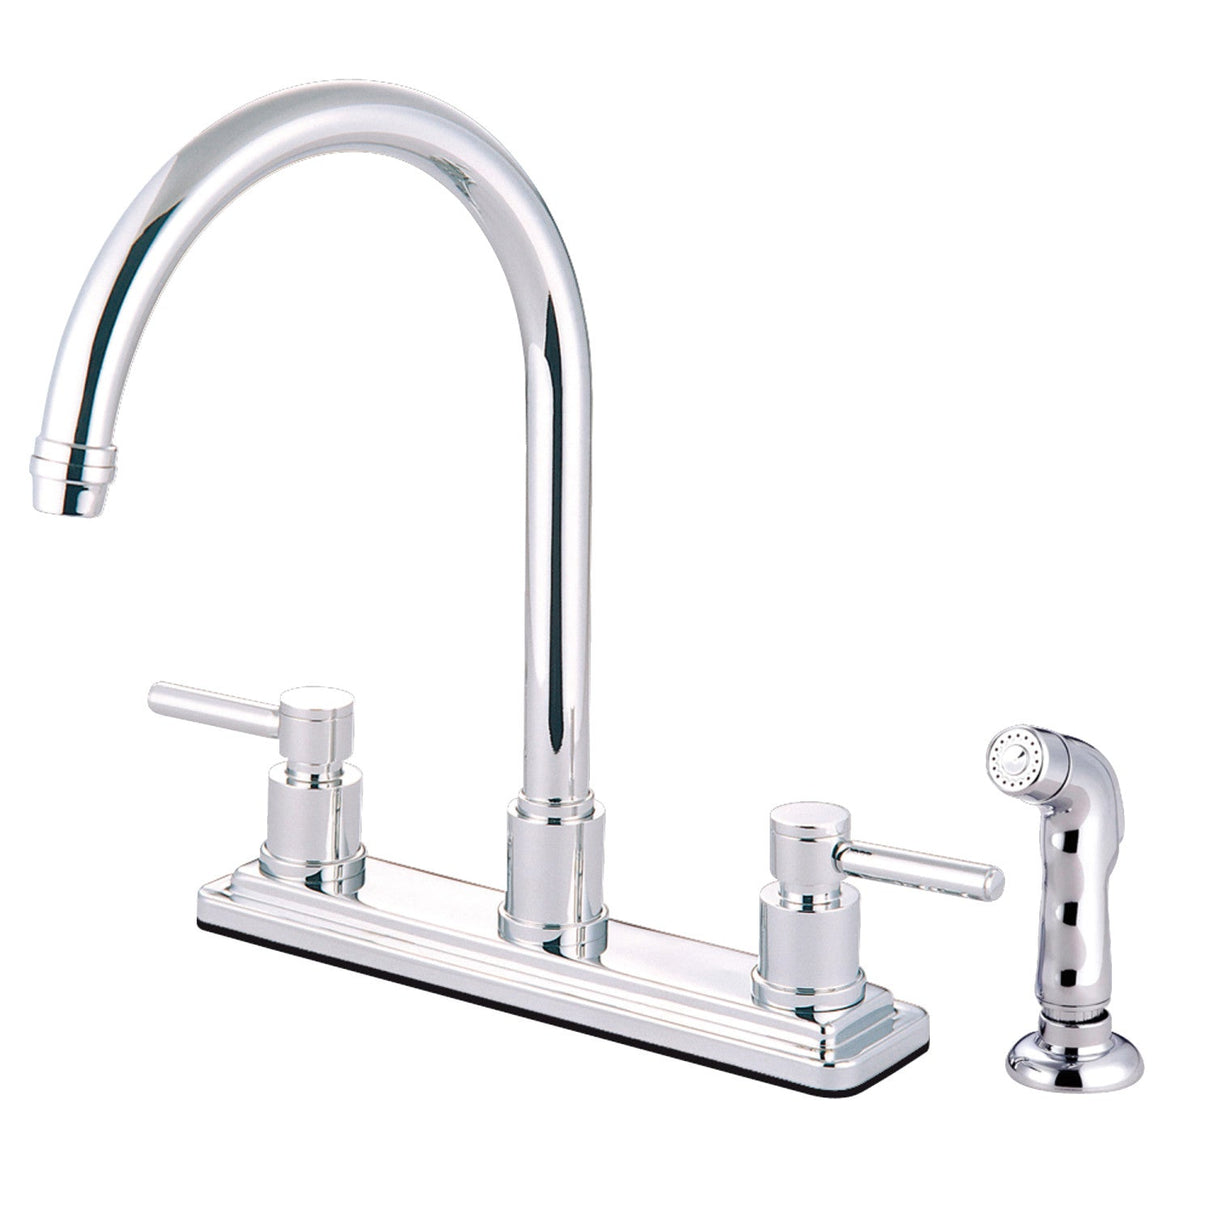 Concord KS8791DL Two-Handle 4-Hole Deck Mount 8" Centerset Kitchen Faucet with Side Sprayer, Polished Chrome